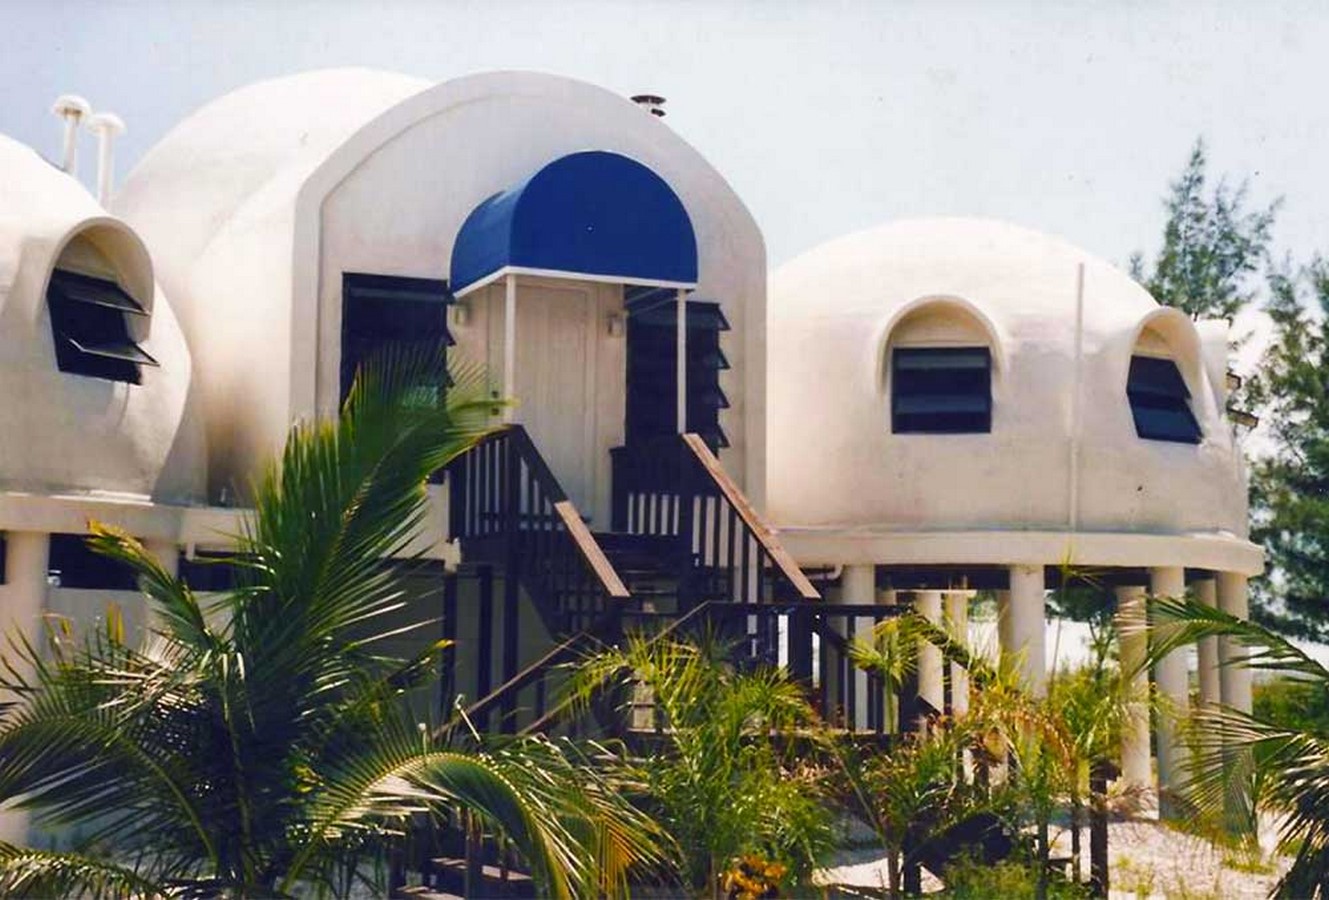 Lost in time: Dome Homes, Marco Island, Florida - Sheet2